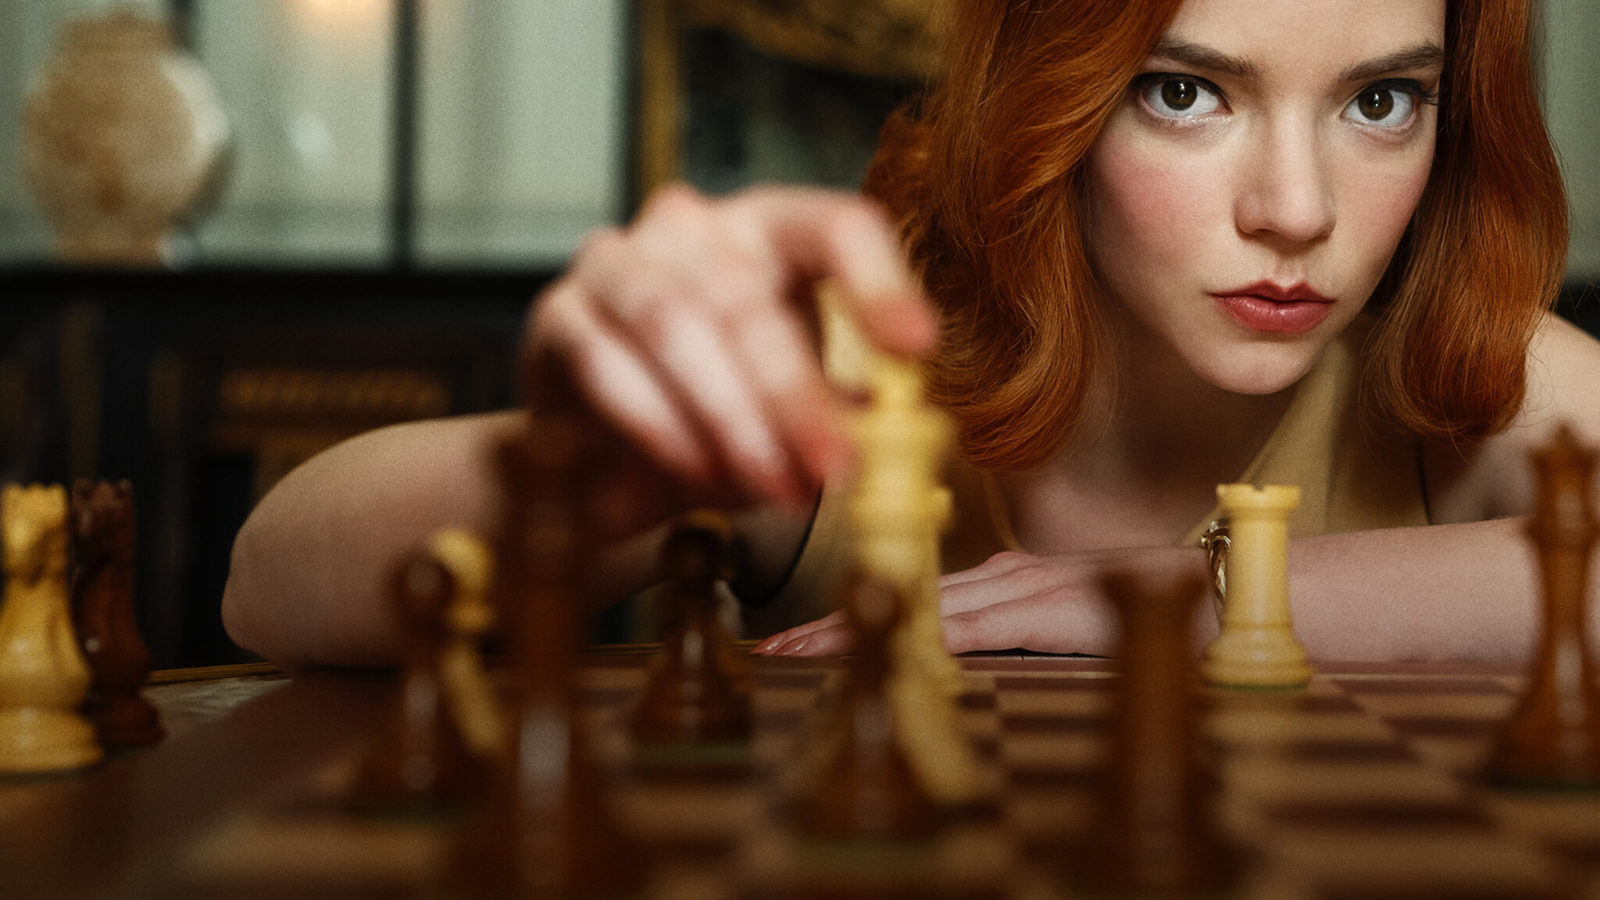 Could 'The Queen's Gambit' Return for Season 2 on Netflix?